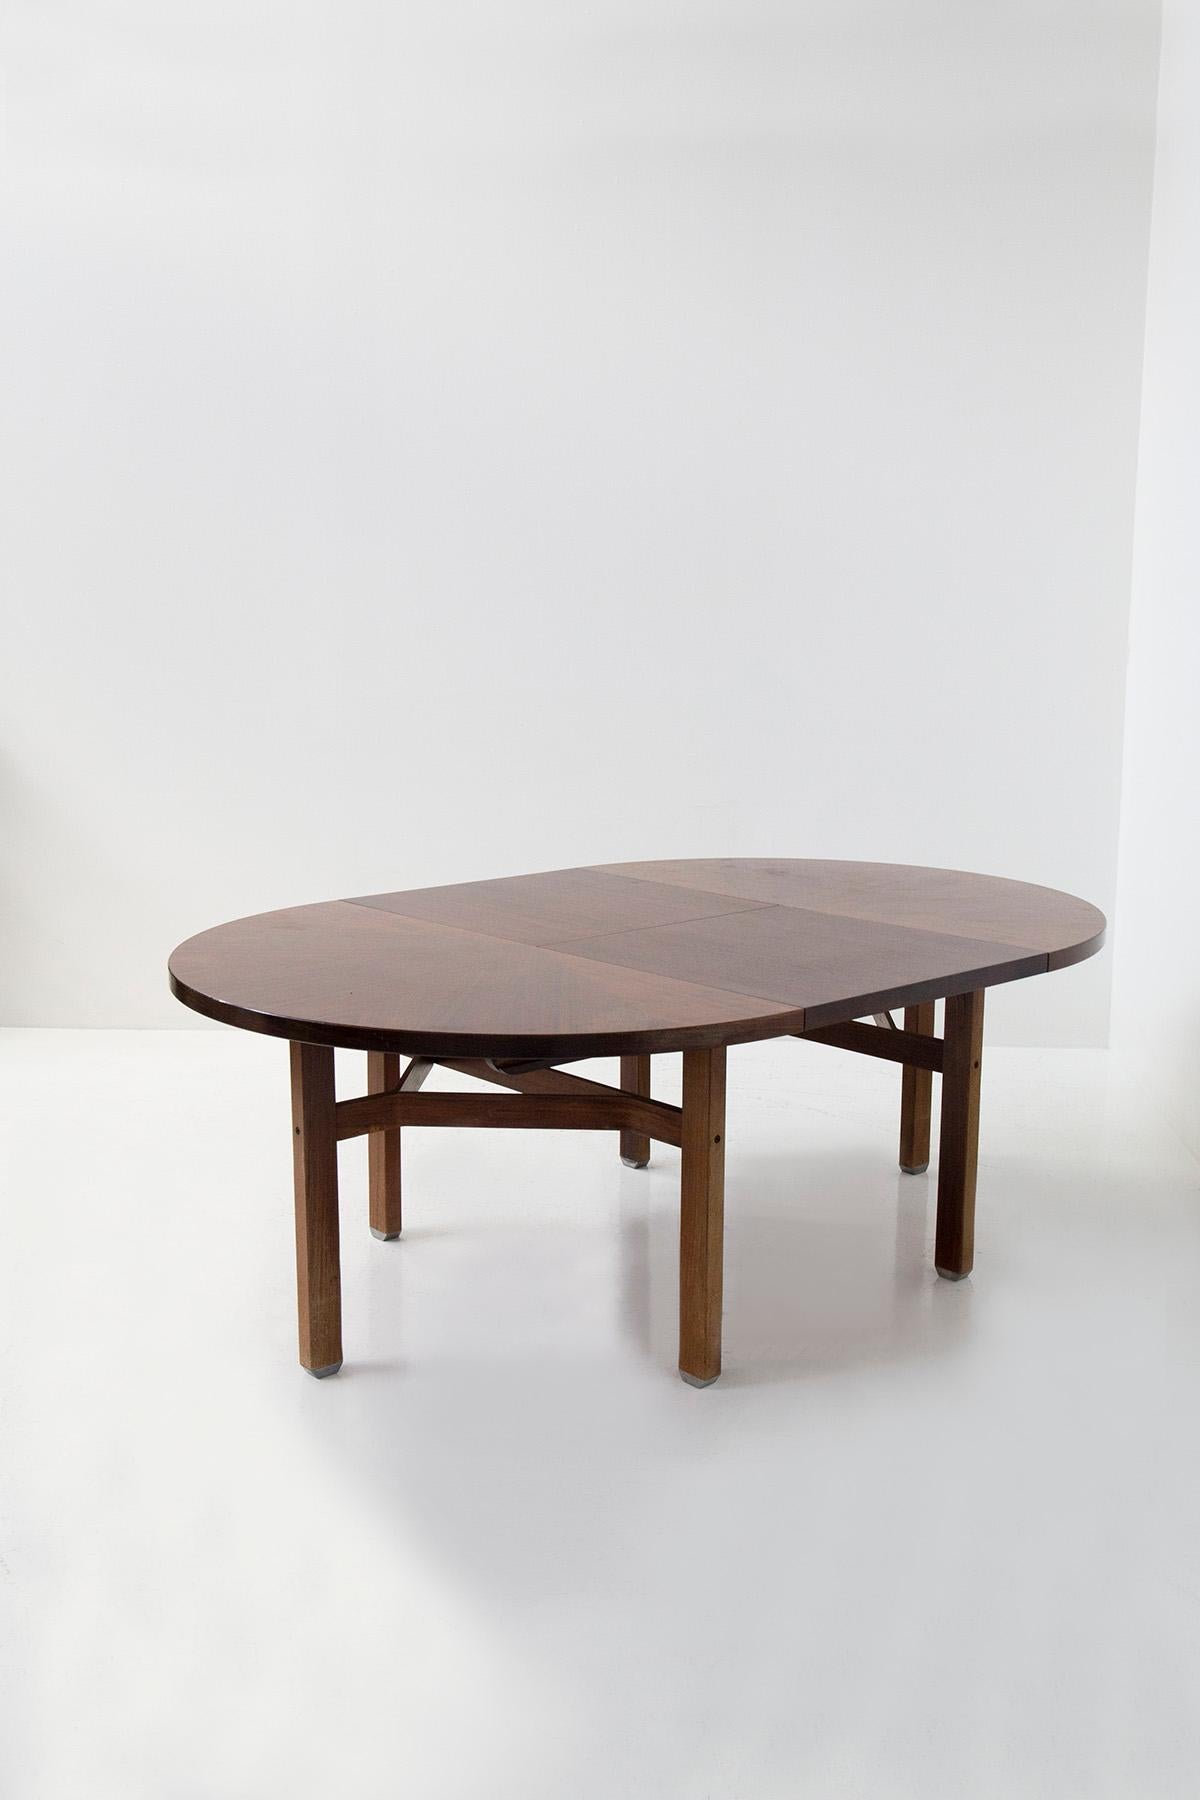 Ico Parisi for MIM Olbia Round Dining Table, Published In Good Condition For Sale In Milano, IT